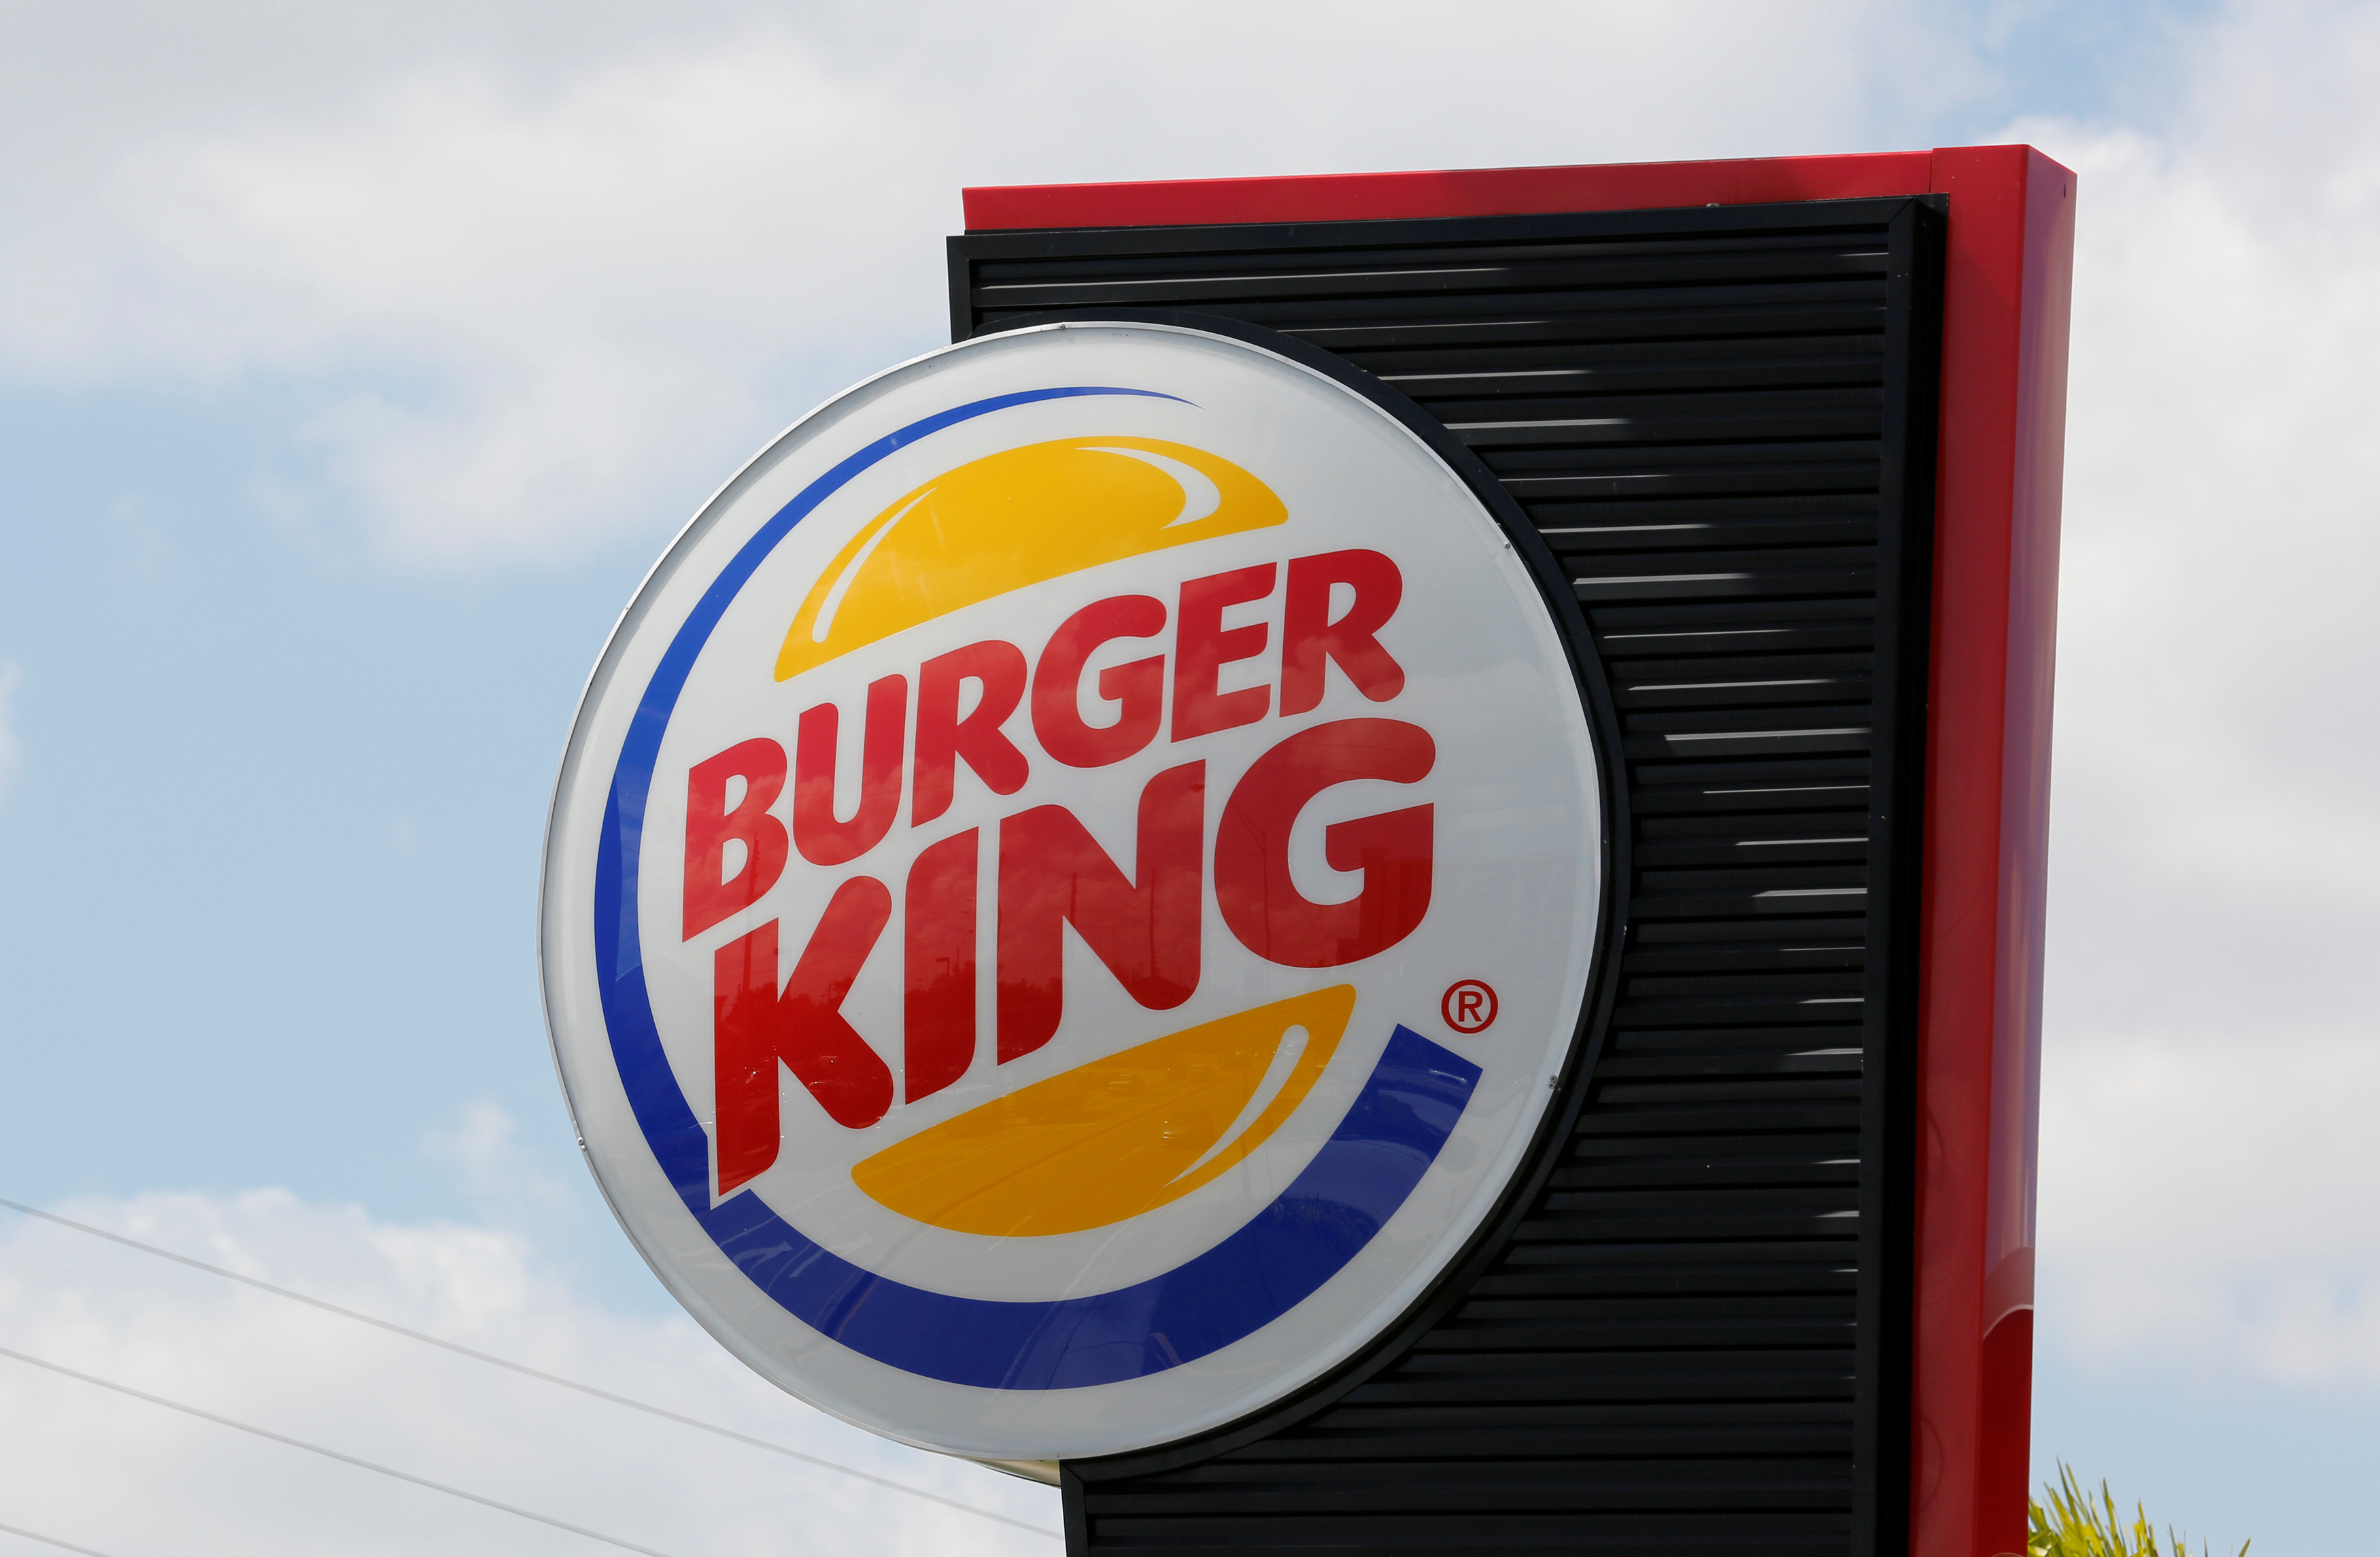 Sgn on a Burger King restaurant is shown in Miami